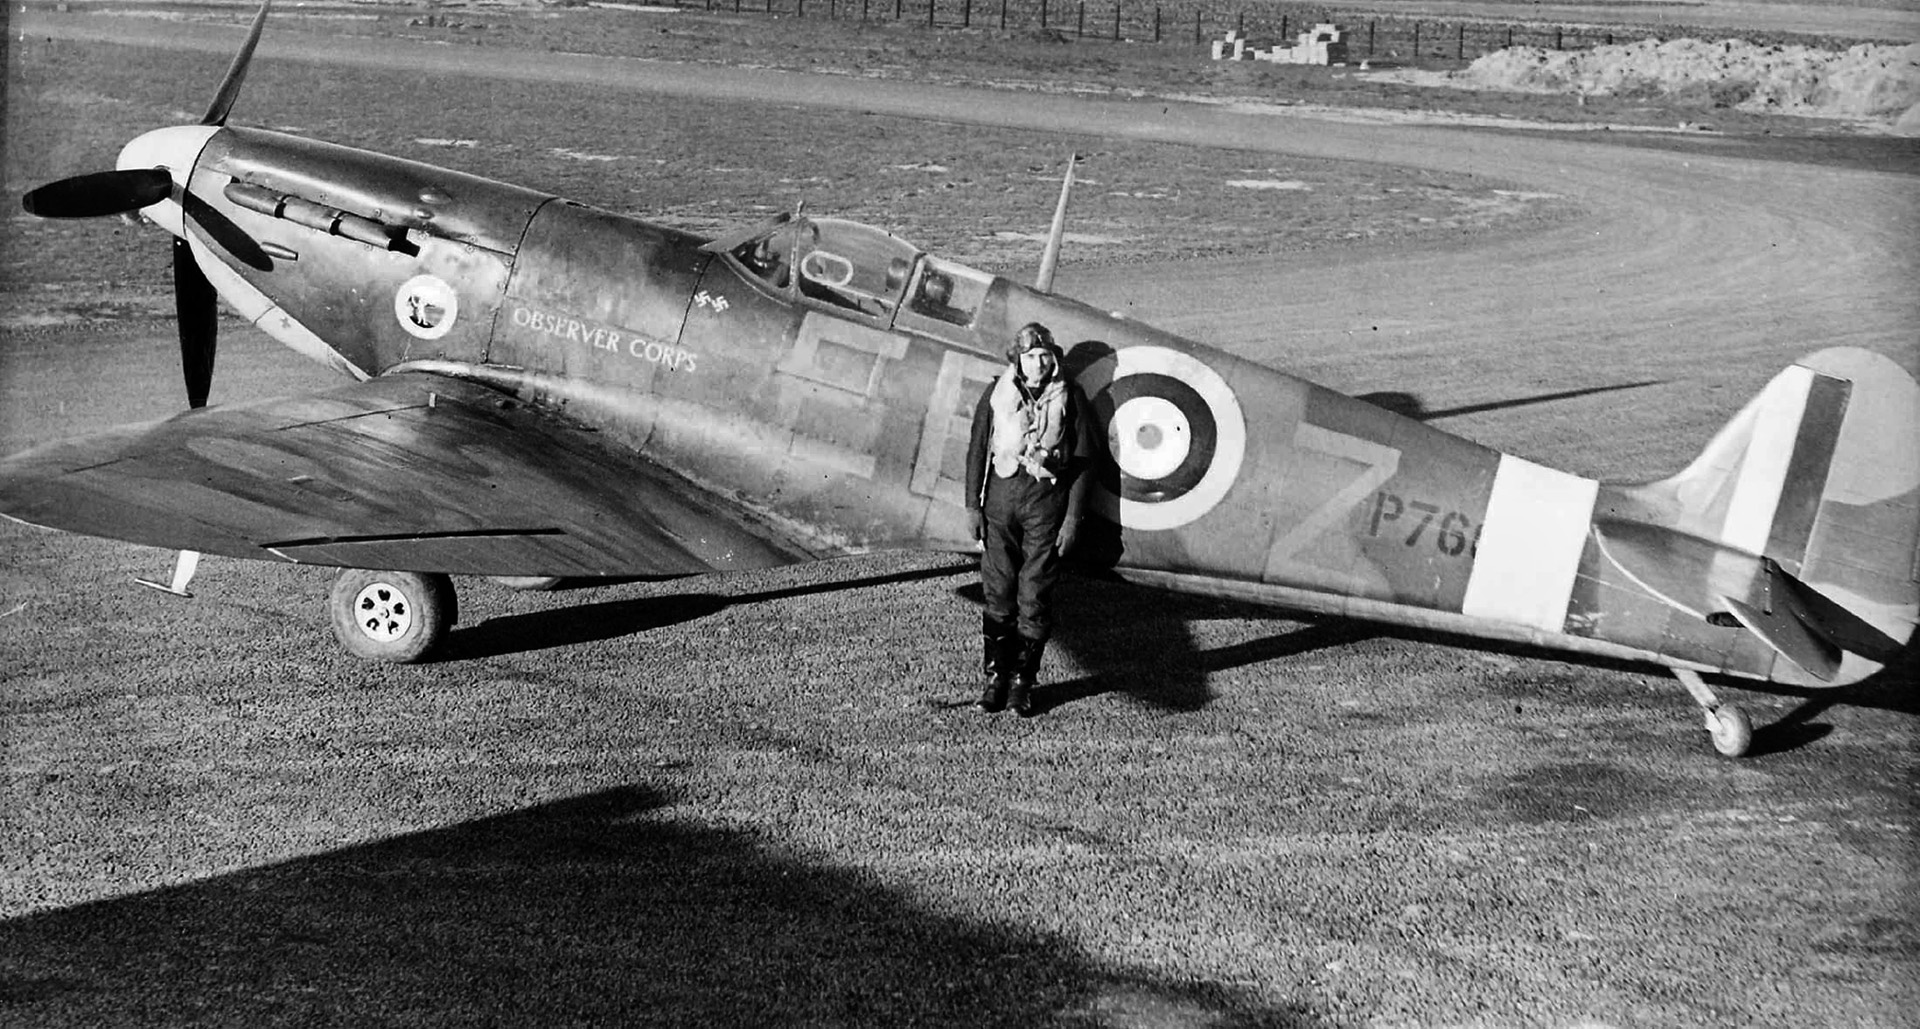 This Spitfire has been specially equipped with camera equipment to serve with the photoreconnaissance unit of RAF No. 41 Squadron. The Spitfire was ideal for photoreconnaissance because of its great speed and agility.